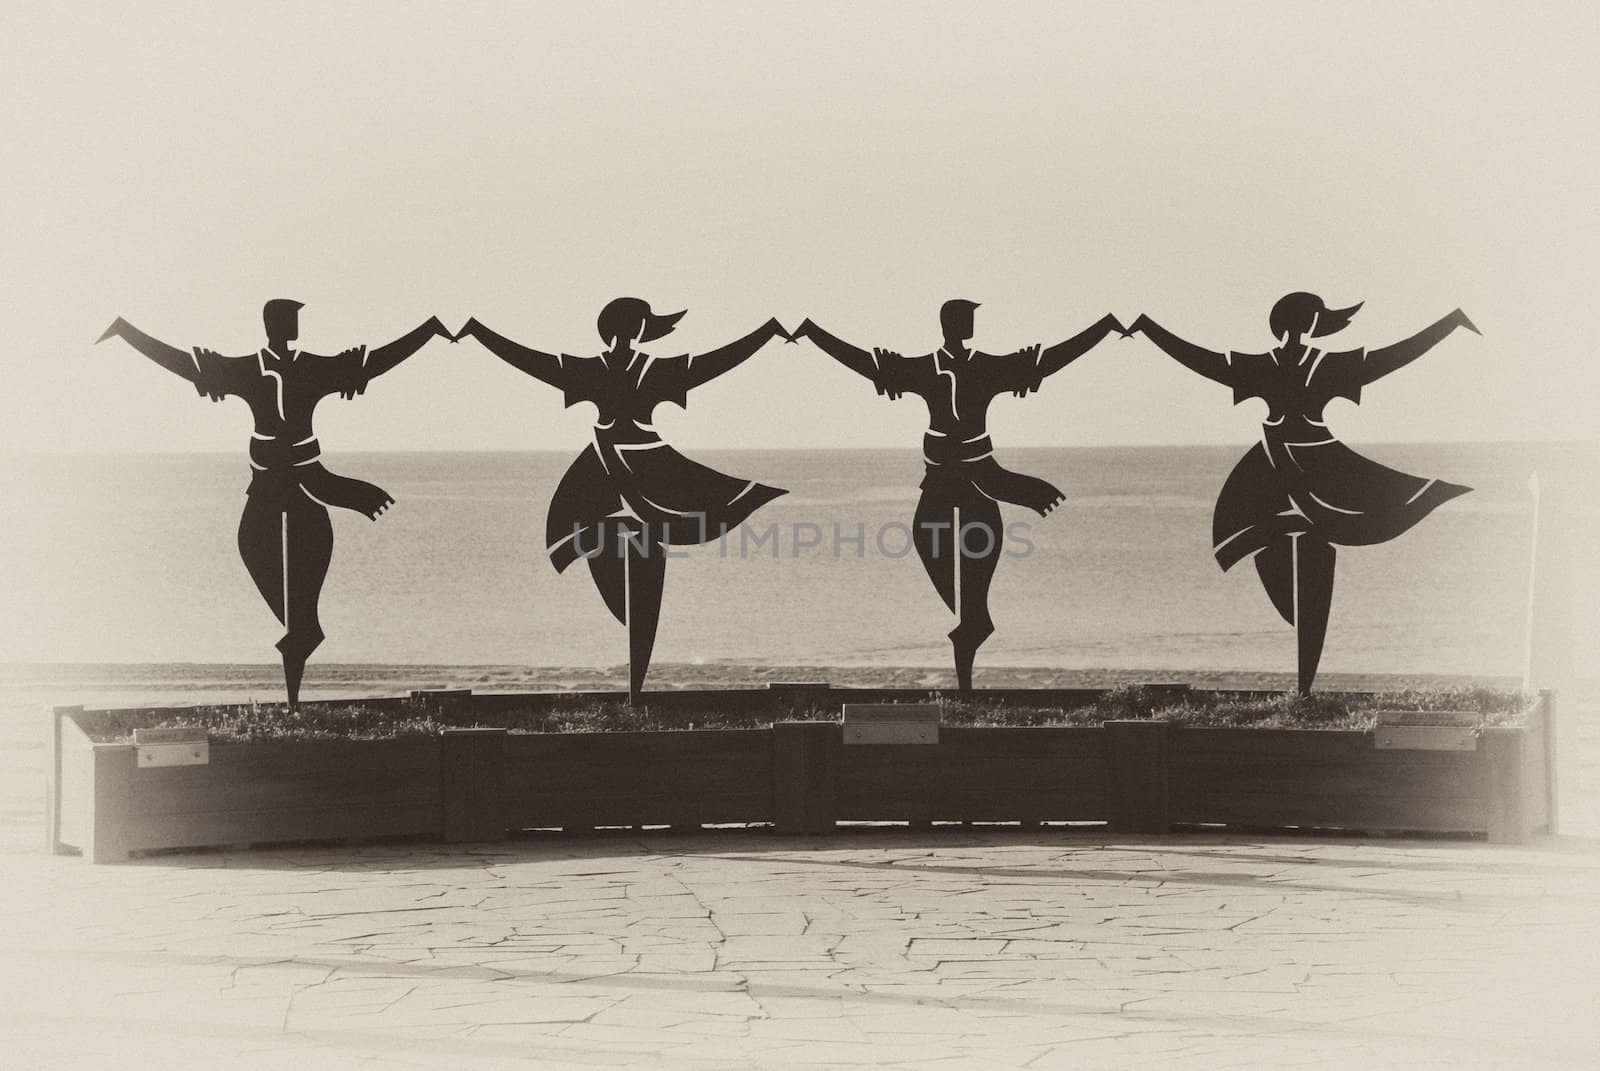 Statue of Catalonian dancers with the sea in background, in sepia